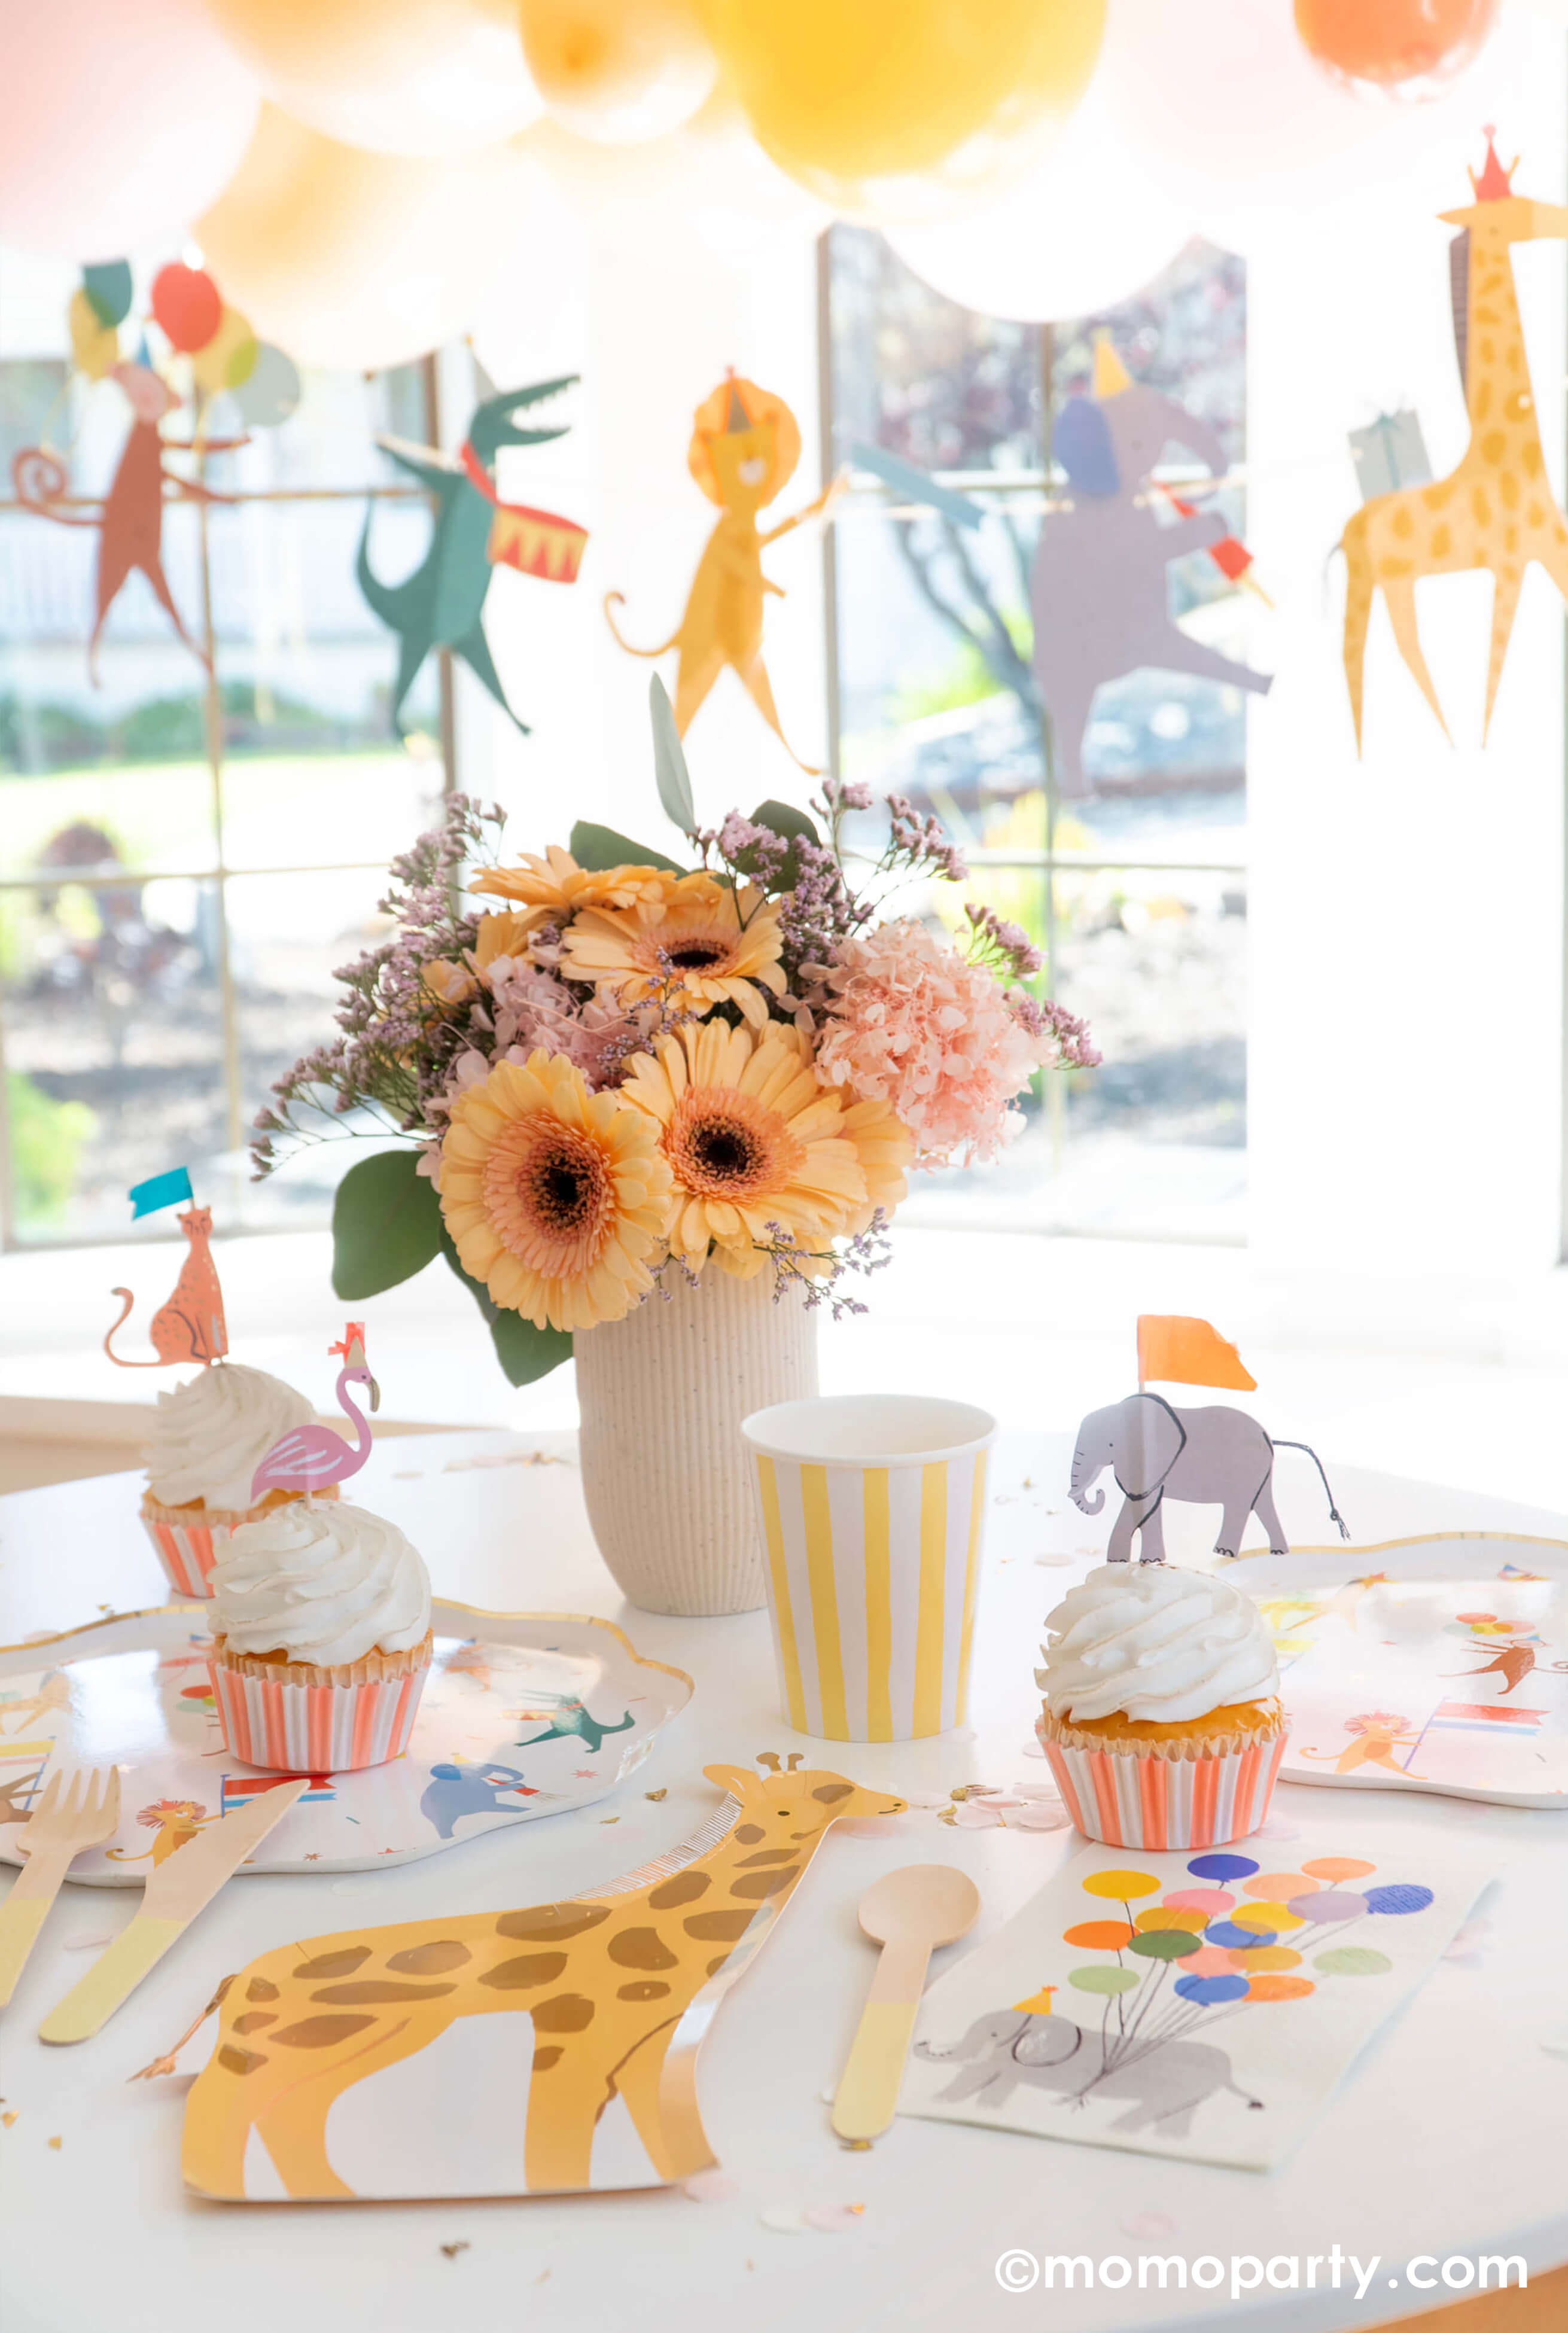 A kid's animal themed party table featuring Momo Party's Animal Parade Dinner plate, a giraffe shaped plate, cupcakes with adorable safari animal cupcake toppers by Meri Meri, Rifle Paper Co's party animal guest napkins flowers in a white vase,  along with light yellow striped cups and yellow wooden utensil. There is also a Animal Parade Garland with balloons decorated behind the table.  it makes a great party inspiration for kid's animal, safari, carnival themed birthday party.